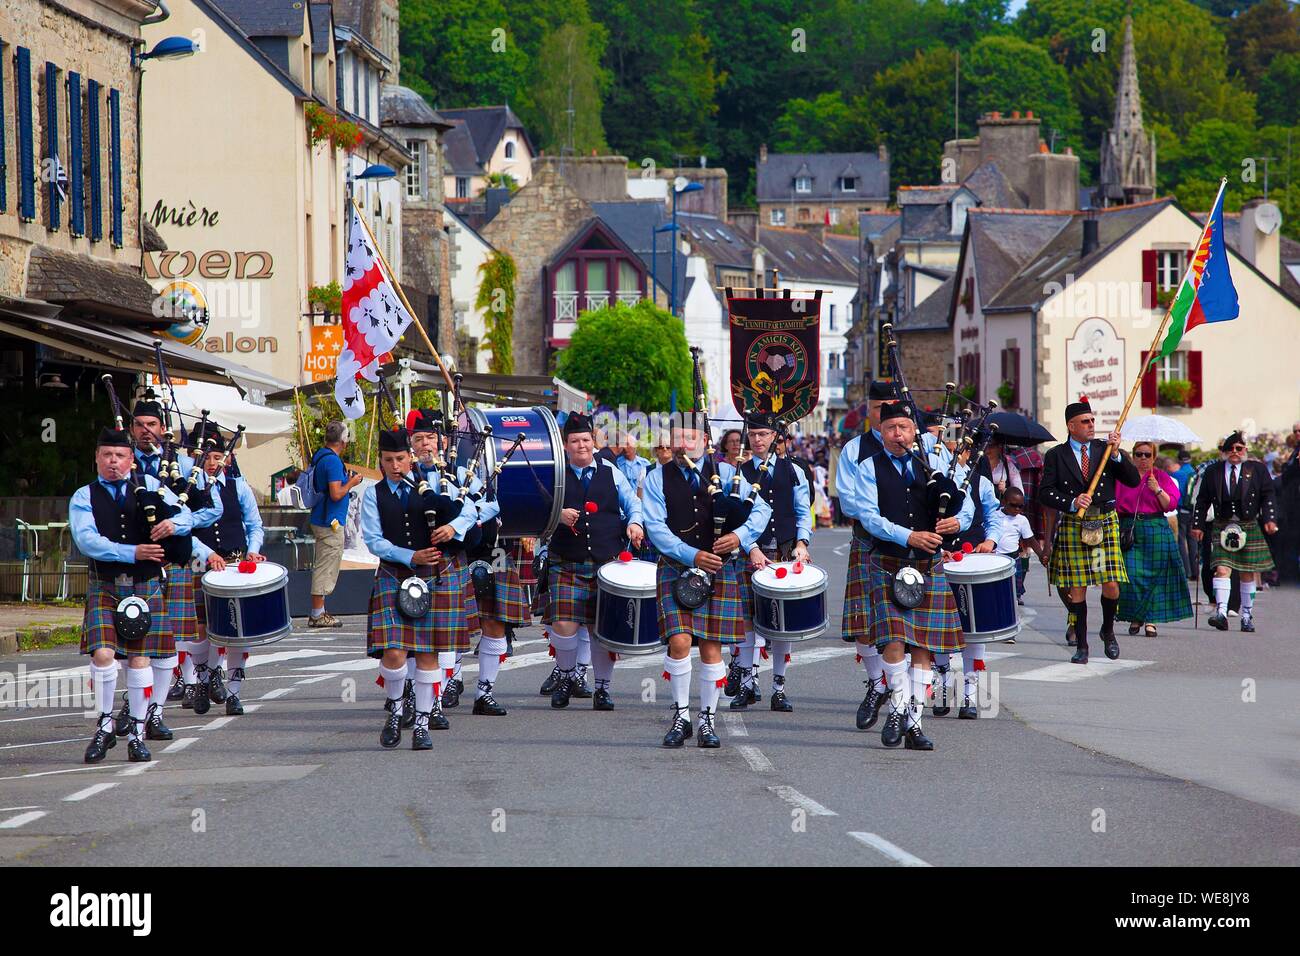 France, Finistere, parade of the Festival of Gorse Flowers 2015 in Pont Aven, Brittany Pipe Band Stock Photo